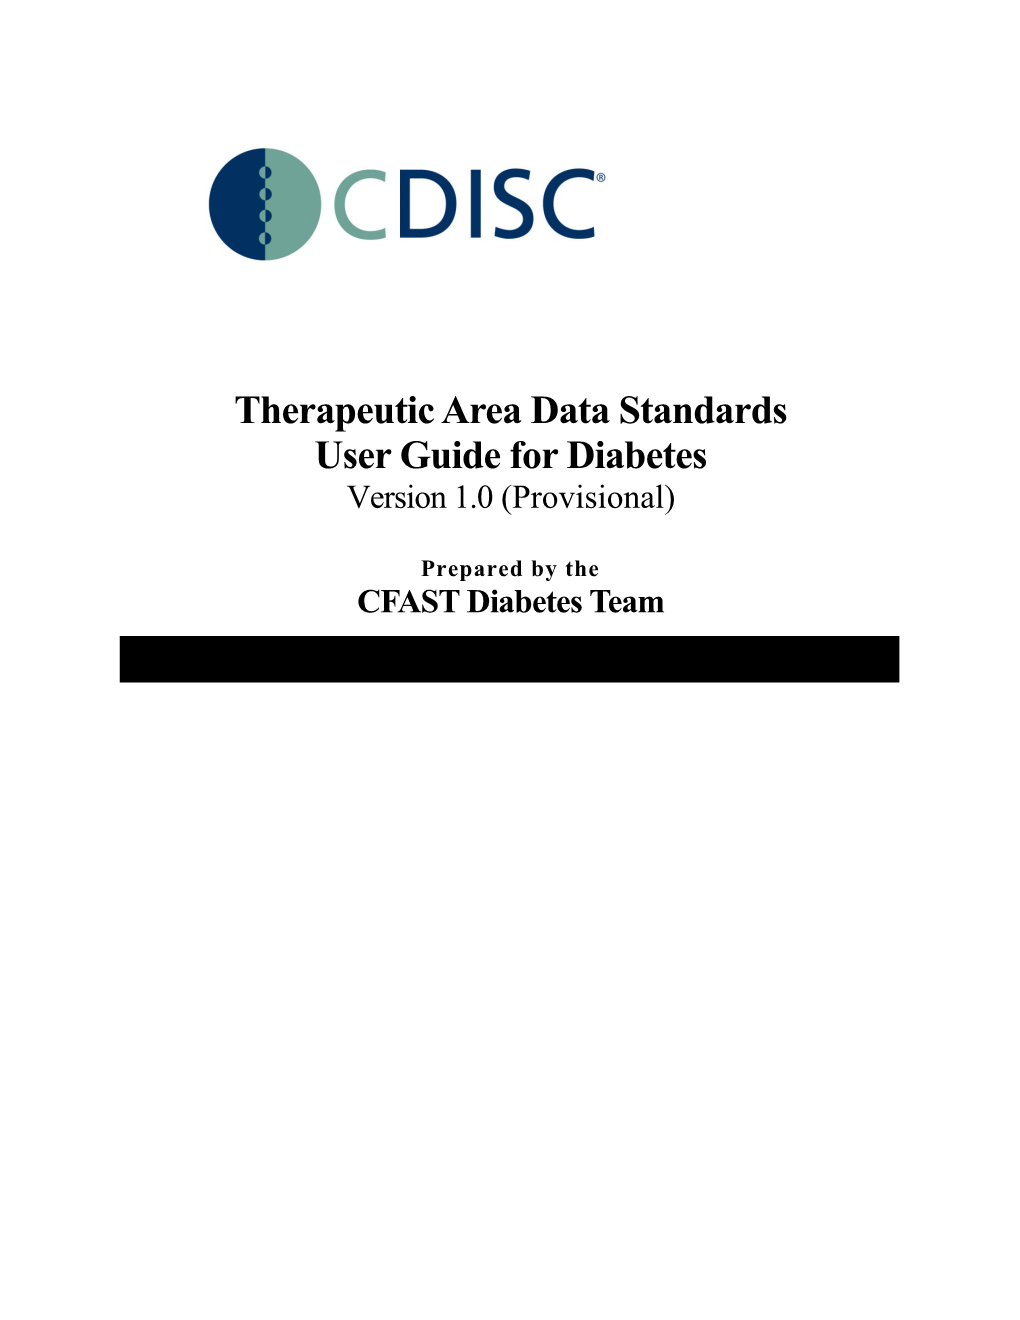 Therapeutic Area Data Standards User Guide for Diabetes Version 1.0 (Provisional)